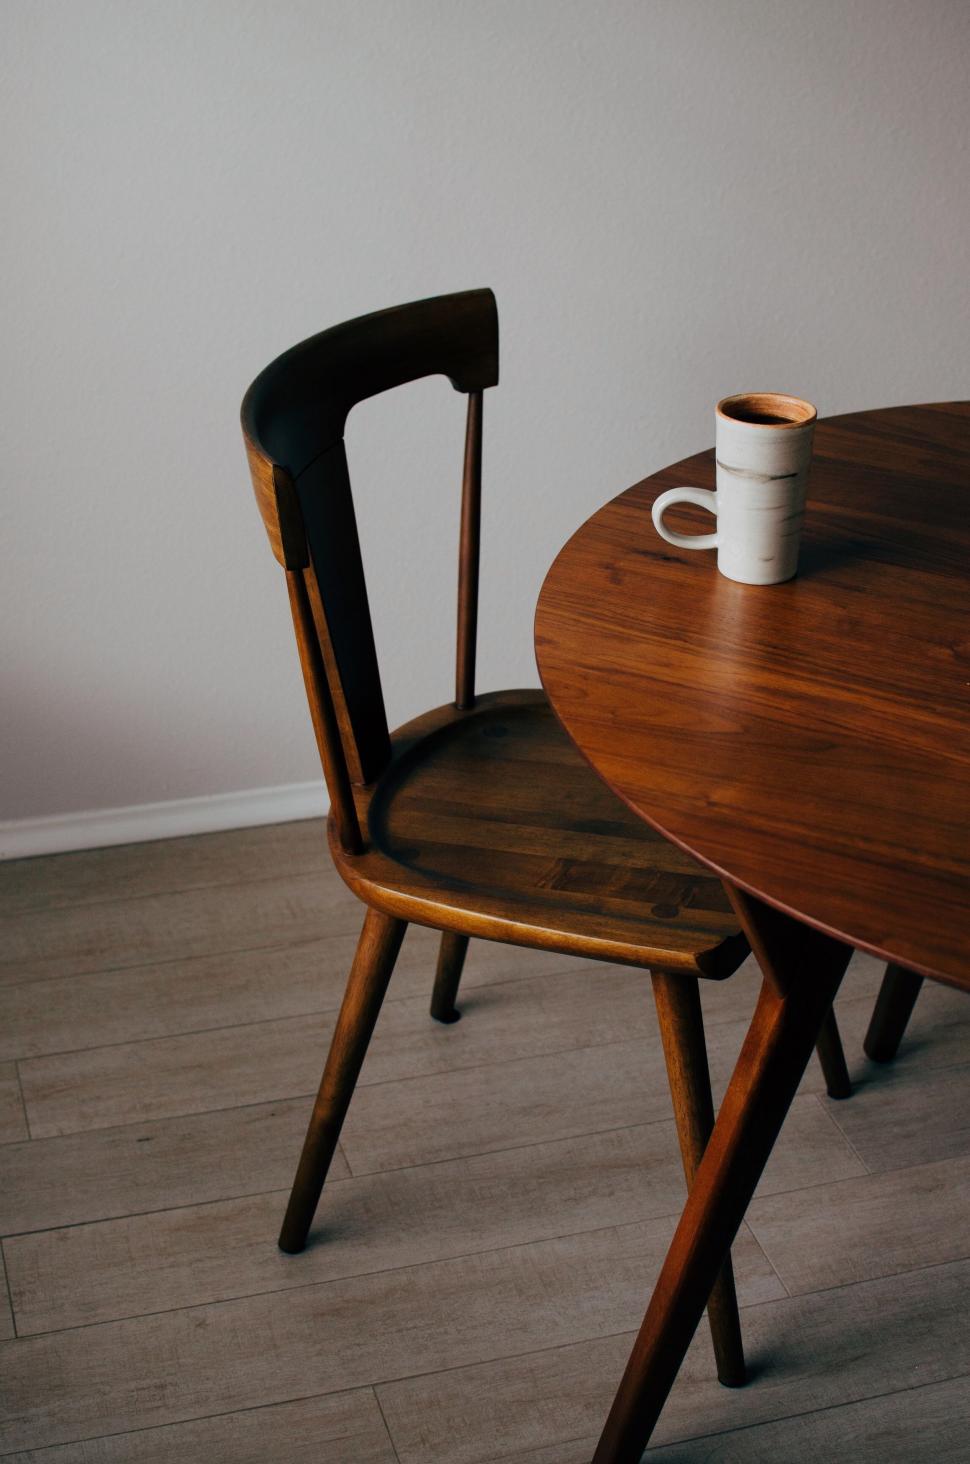 Free Image of Wooden Table With Two Chairs and Cup 